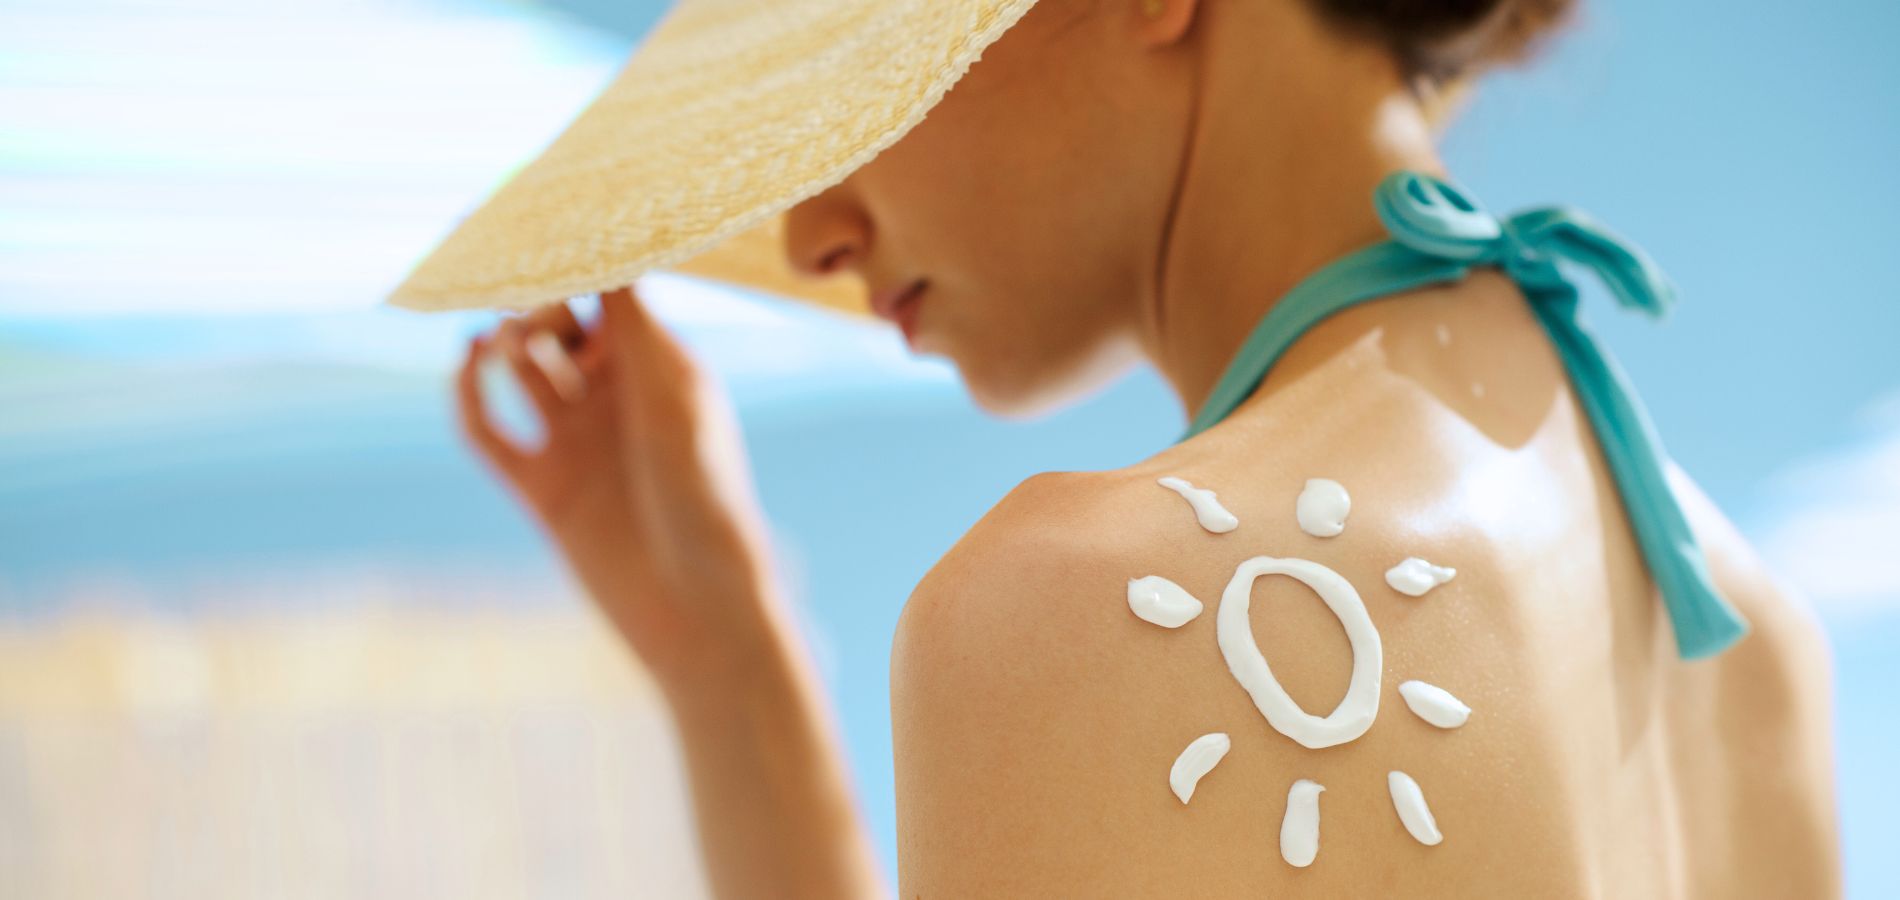 The-Major-Trends-That-Are-Leading-Sun-Care-Products-ภาพเด่น